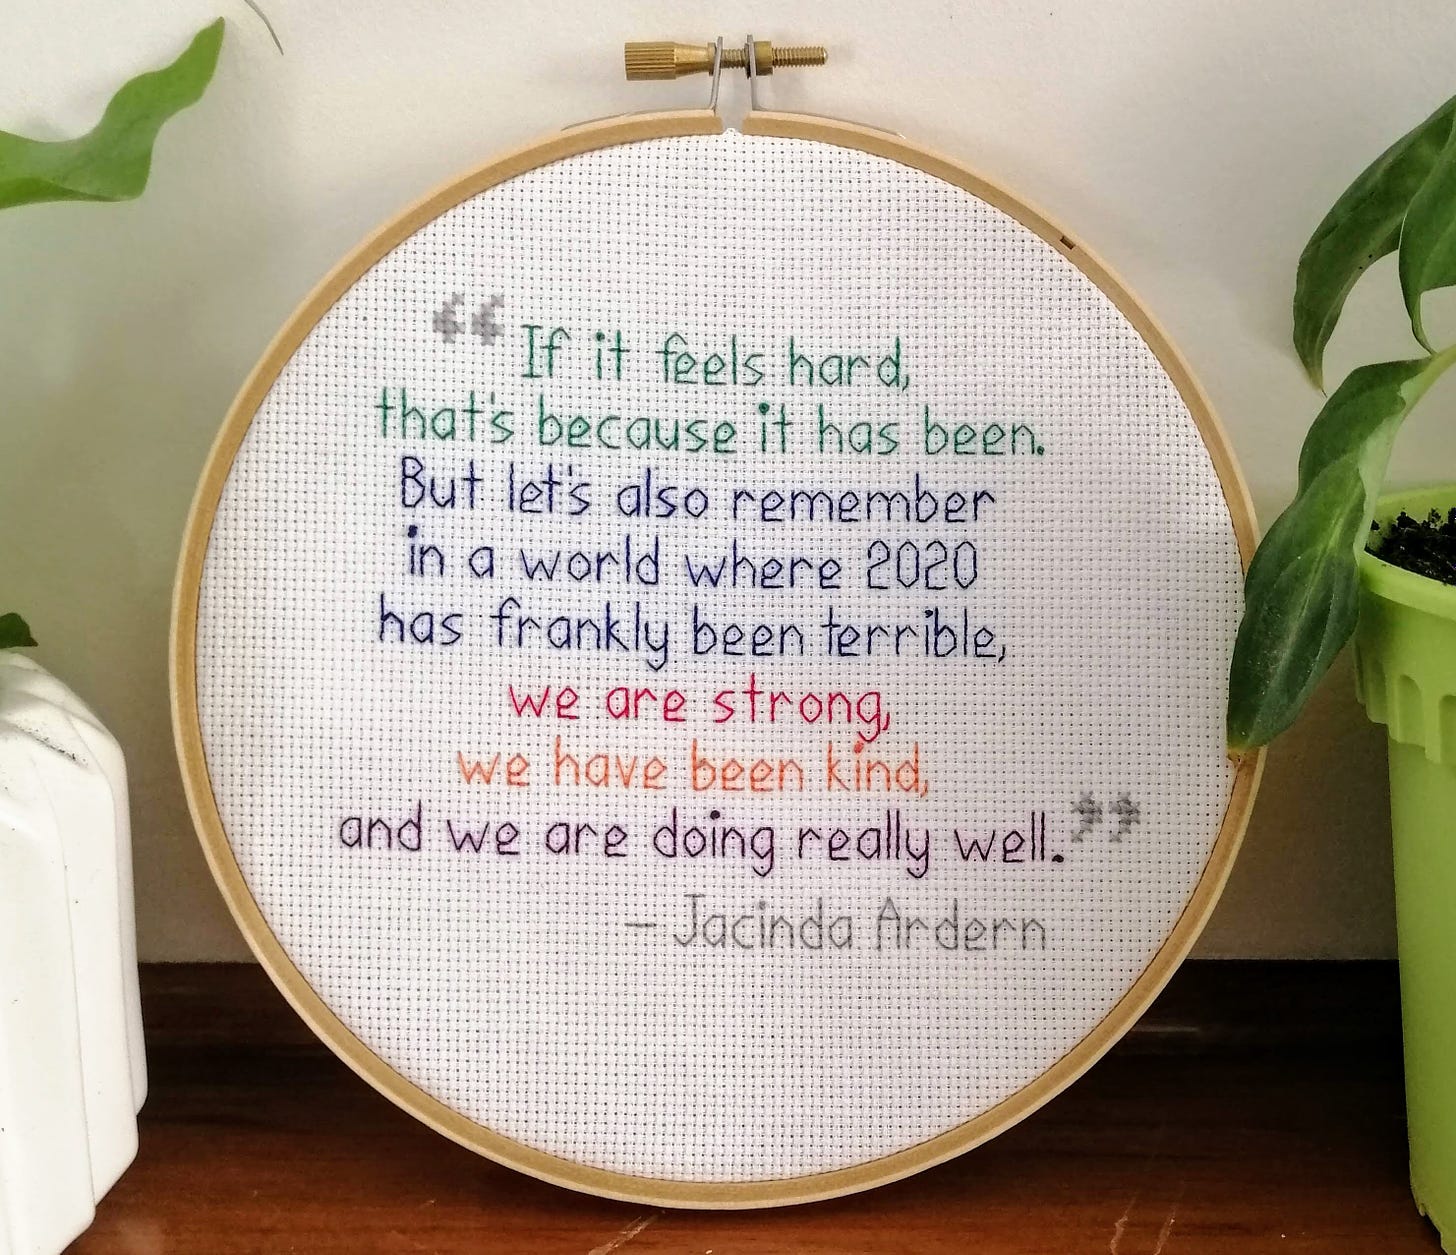 Cross stitch quote in a frame, text reads "If it feels hard right now, that's because it is. In a world where 2020 has frankly been terrible, we are strong, we have been kind, and we are doing really well." Jacinda Ardern